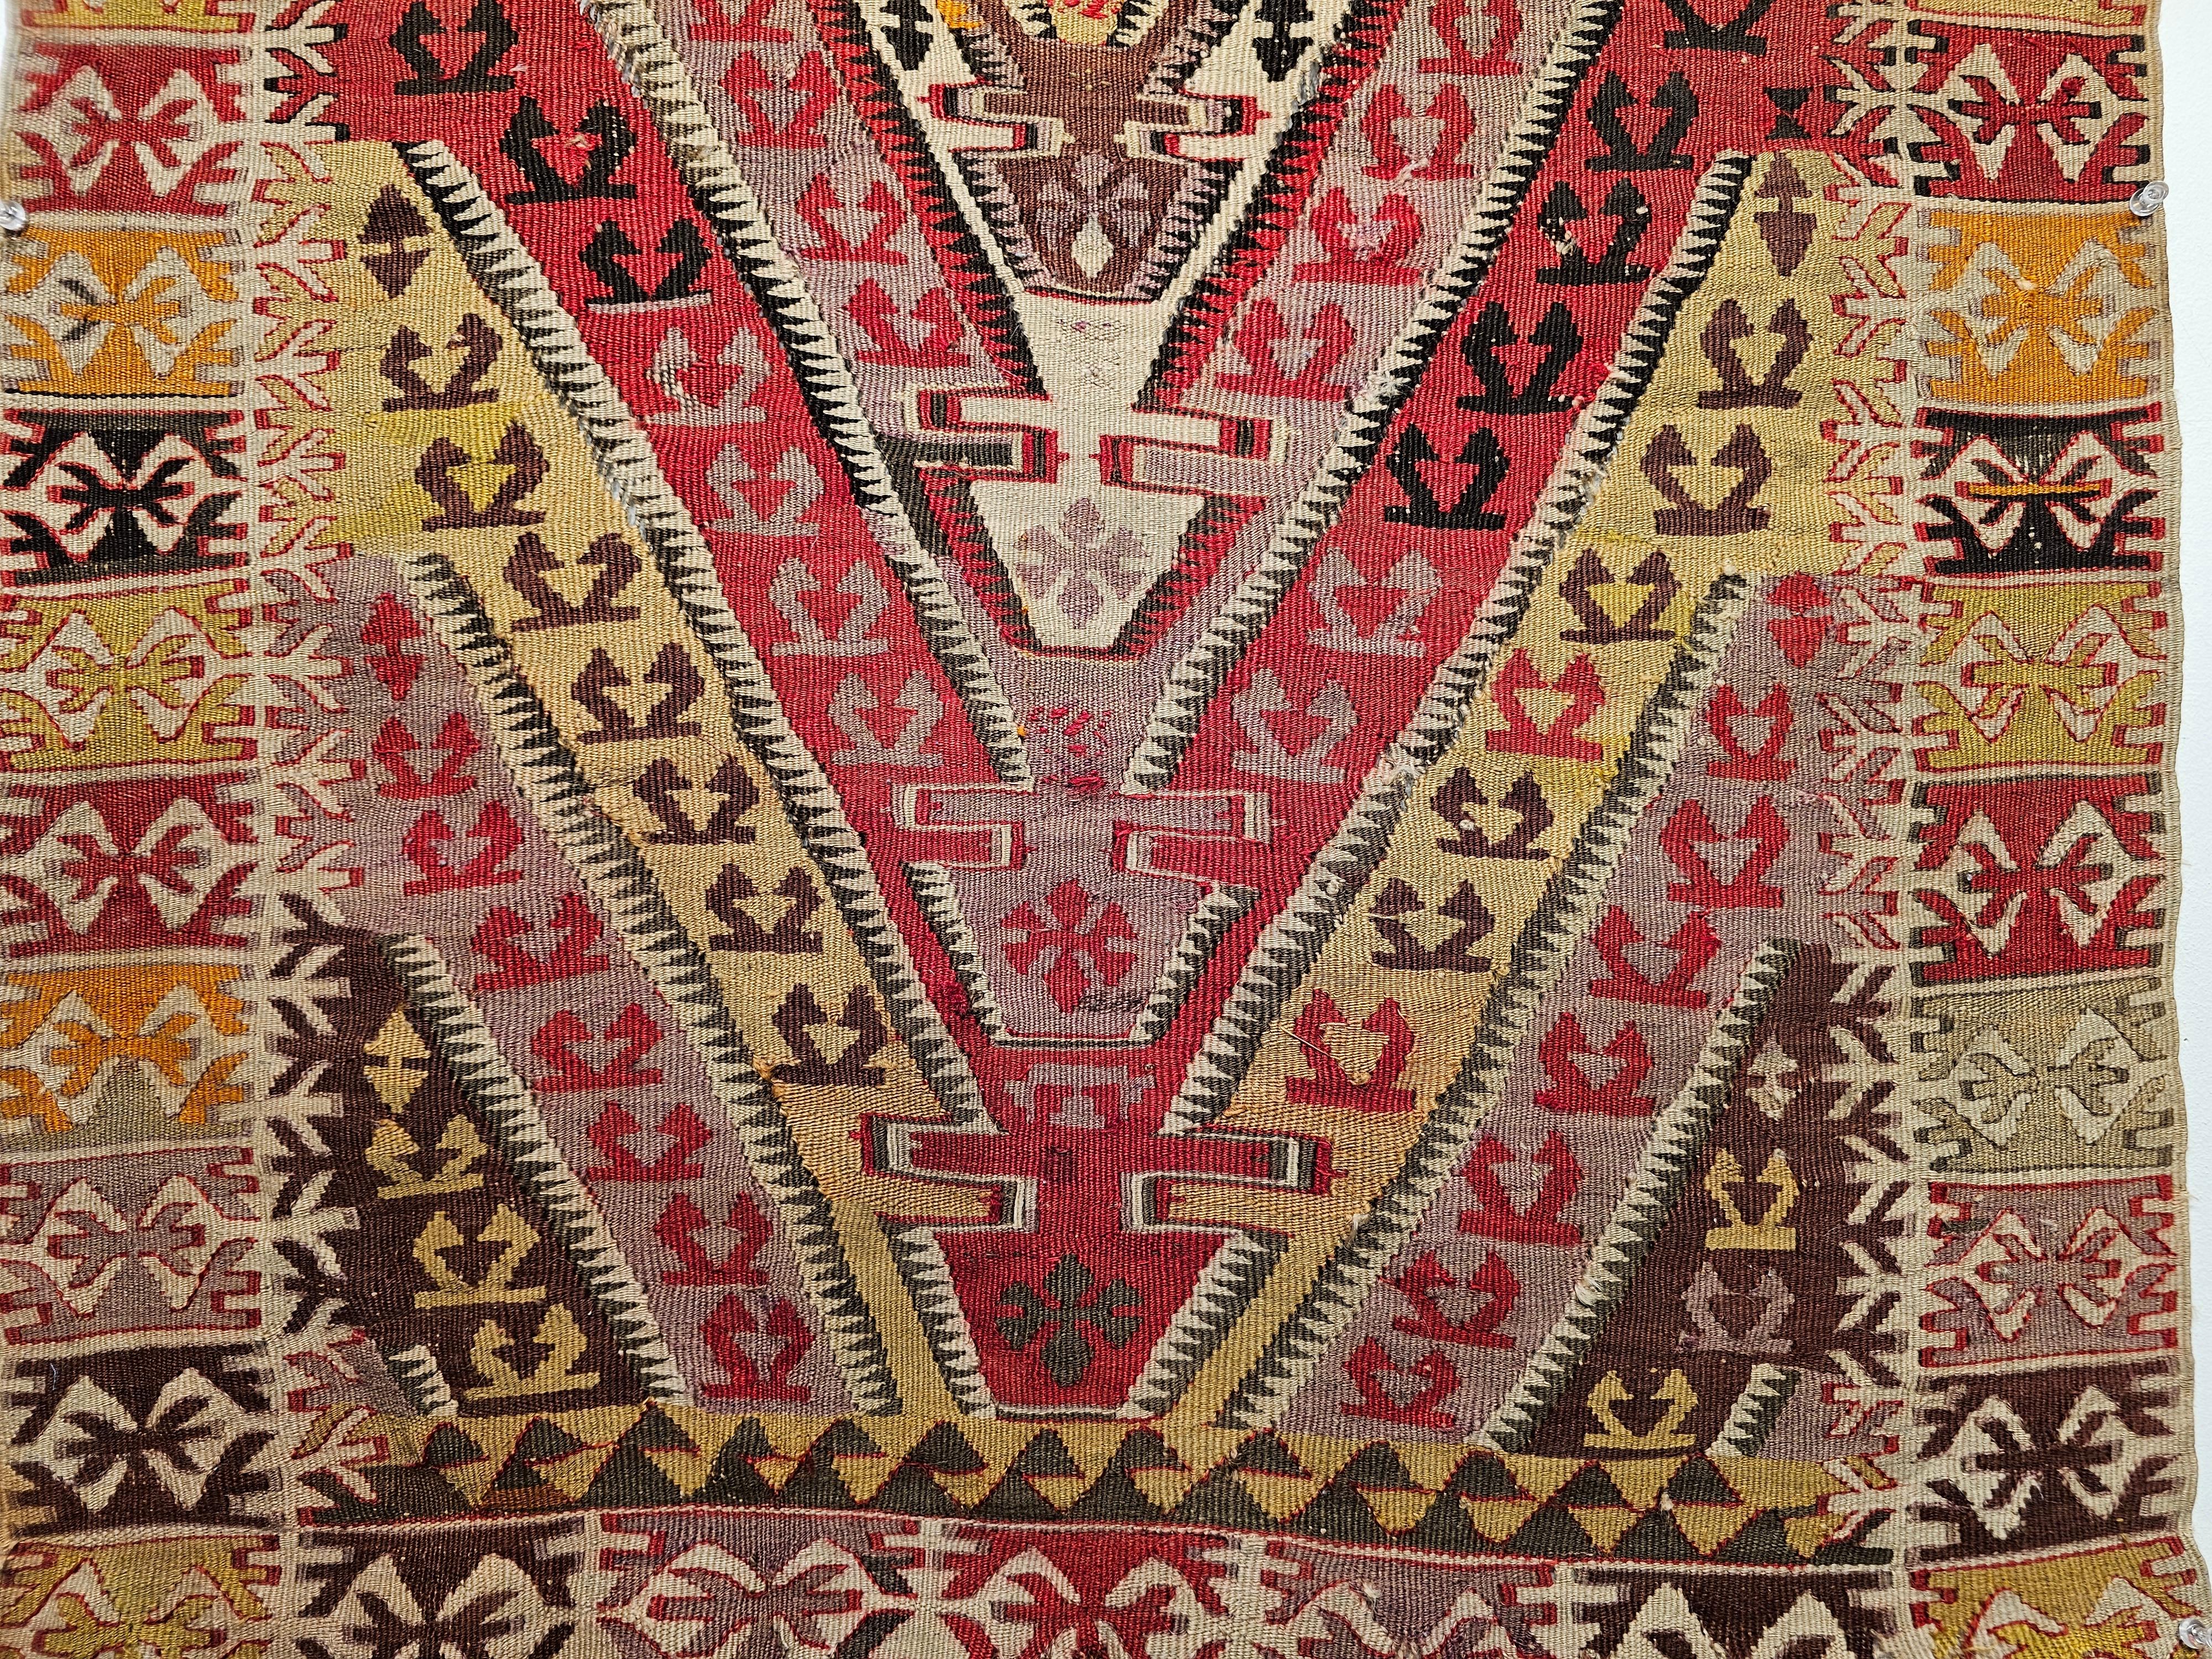 19th Century Anatolian Kilim Area Rug in Medallion Pattern in Red, Yellow, Brown In Good Condition For Sale In Barrington, IL